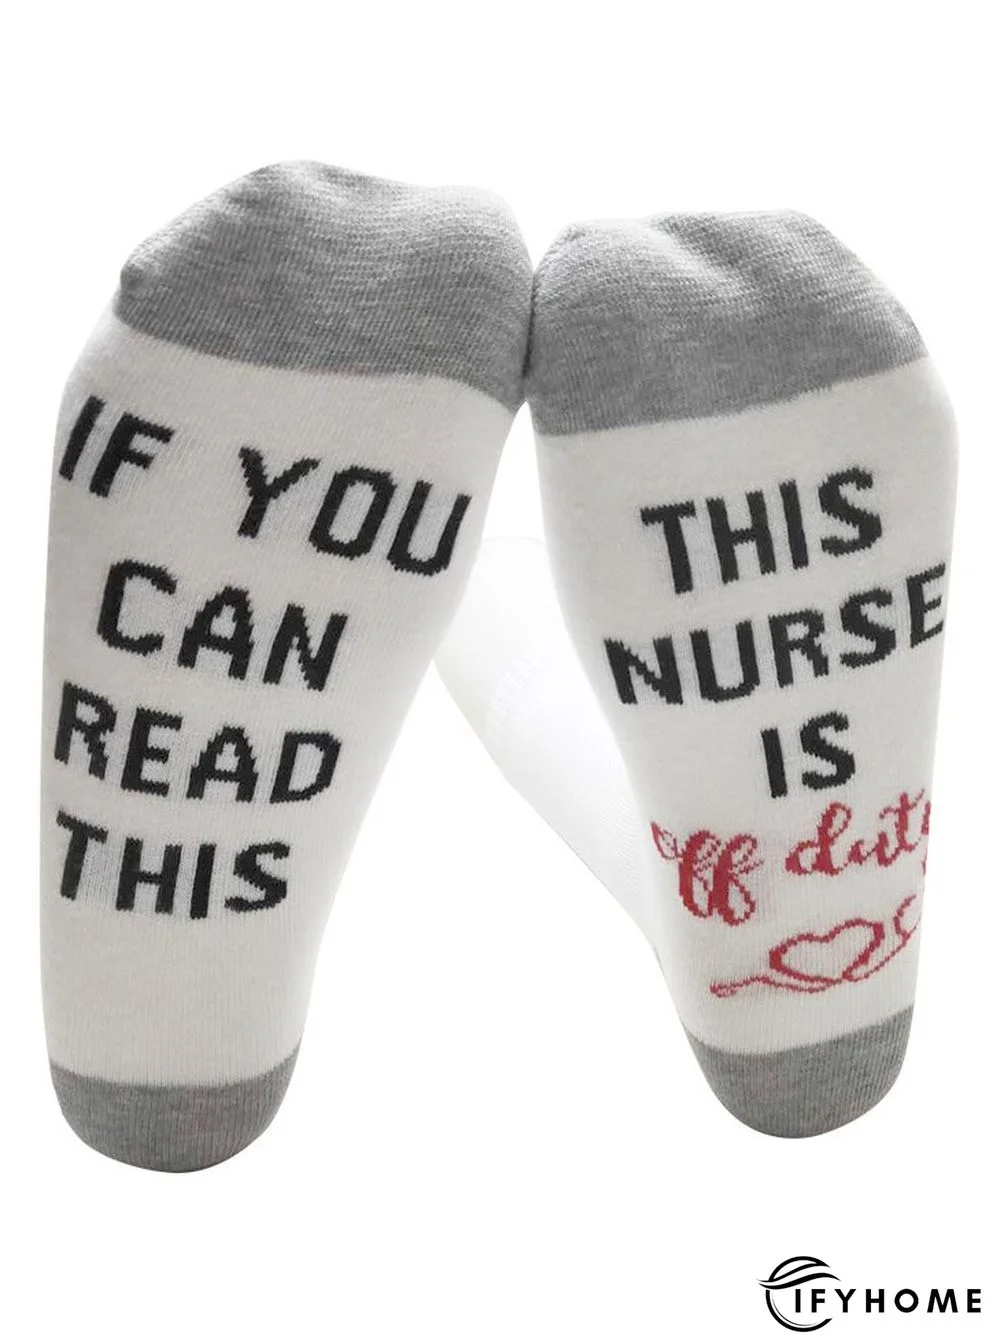 If You Can Read This Alphabet Slogan Socks Home Daily | IFYHOME